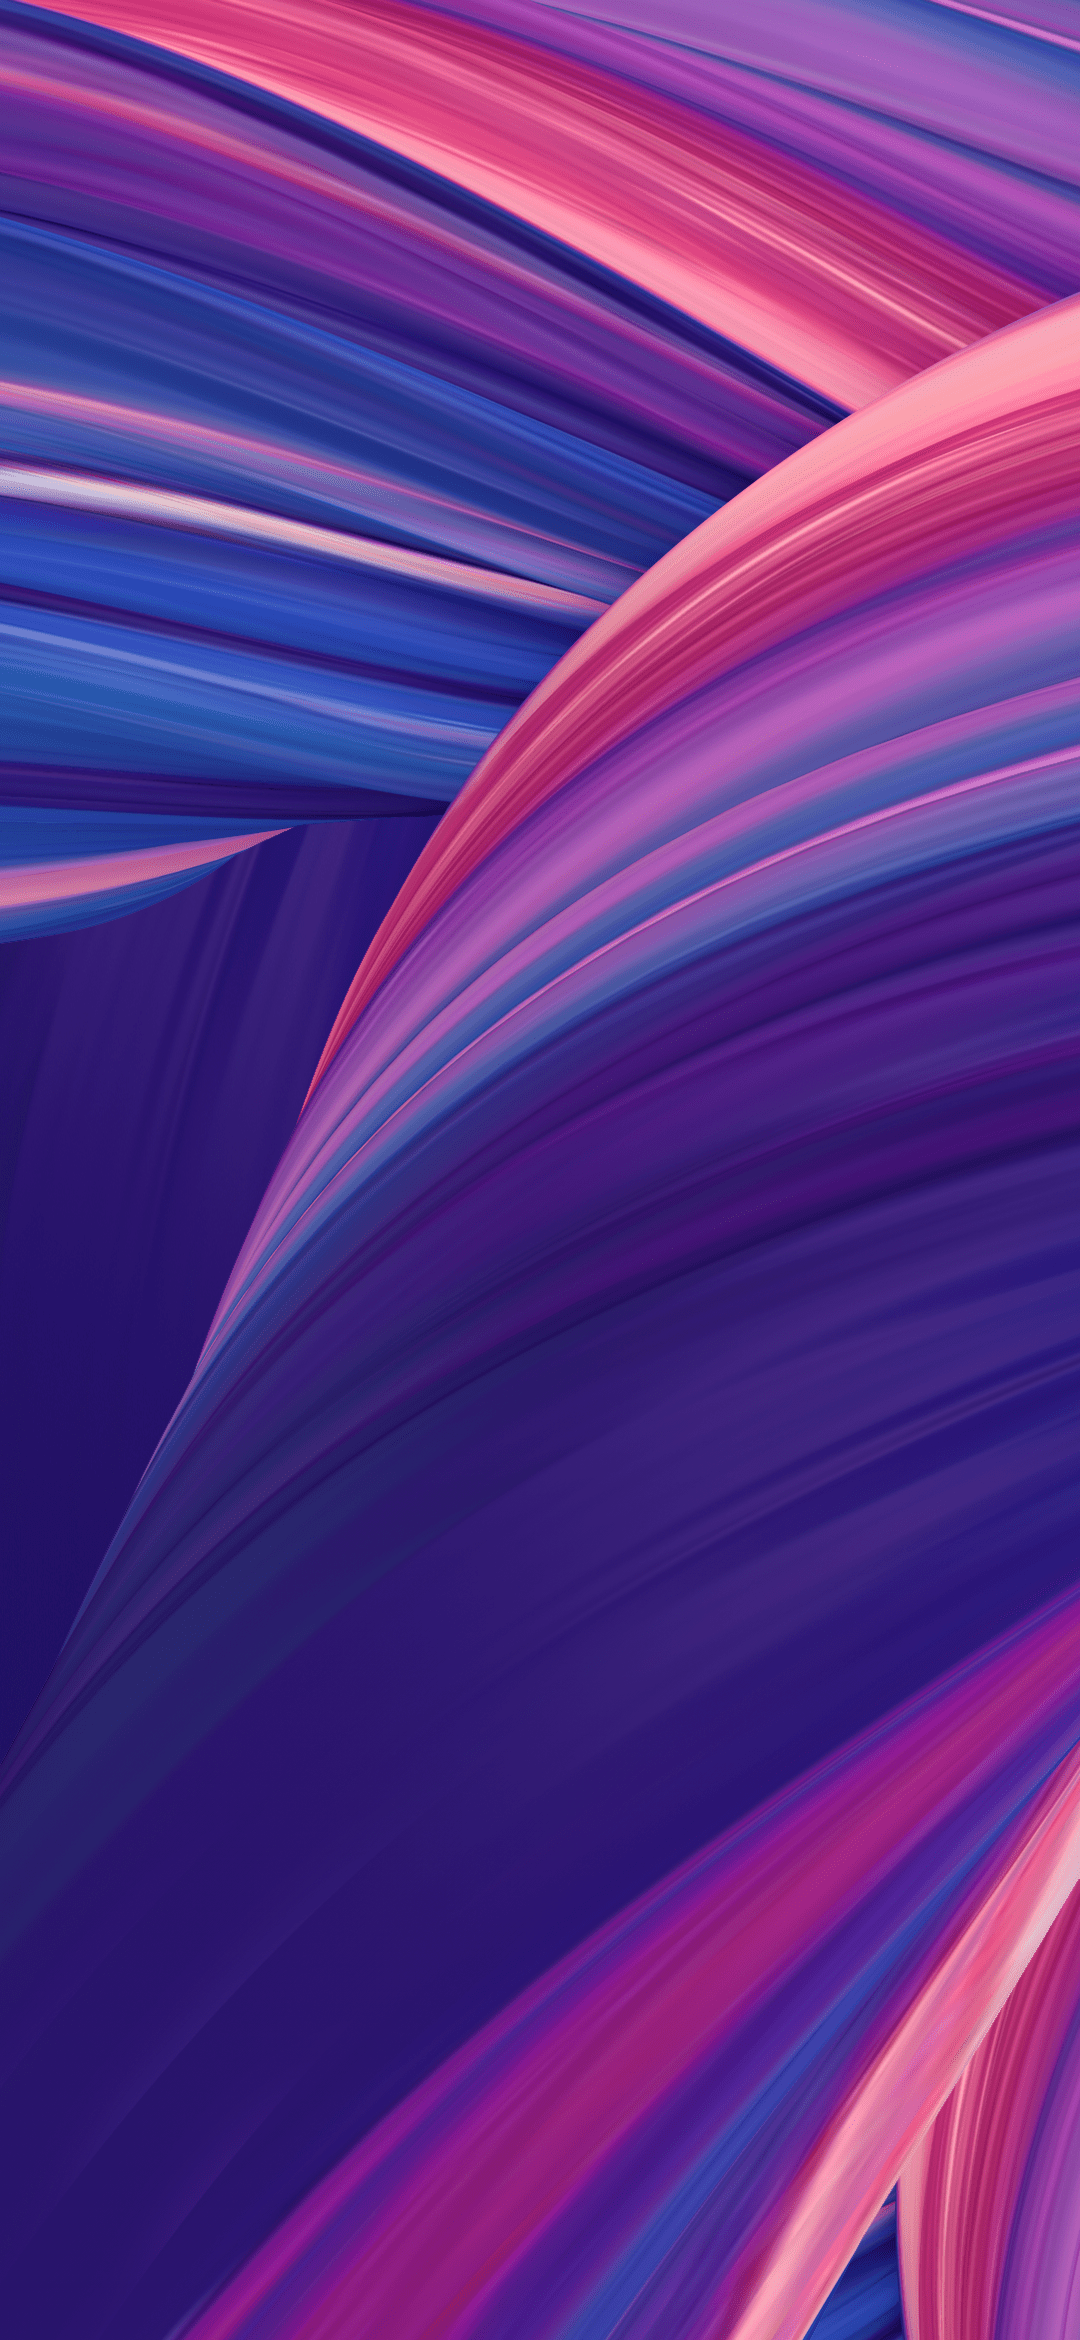 Wallpaper 3d Android Oppo Image Num 7